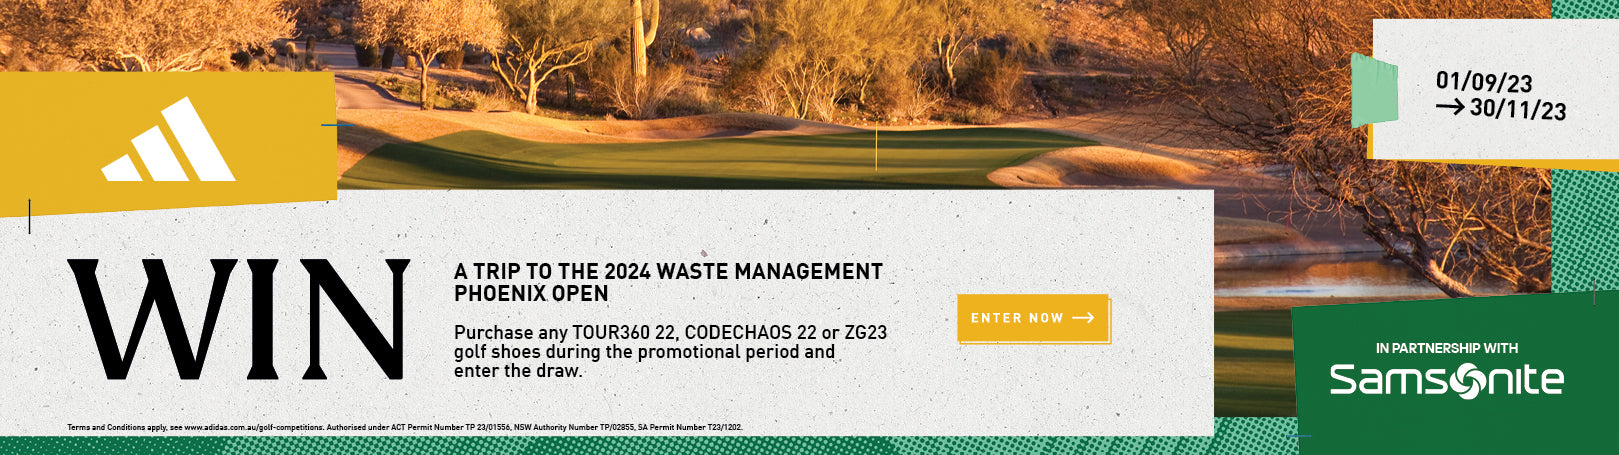 Adidas Win a Trip To The Waste Management Phoenix Open